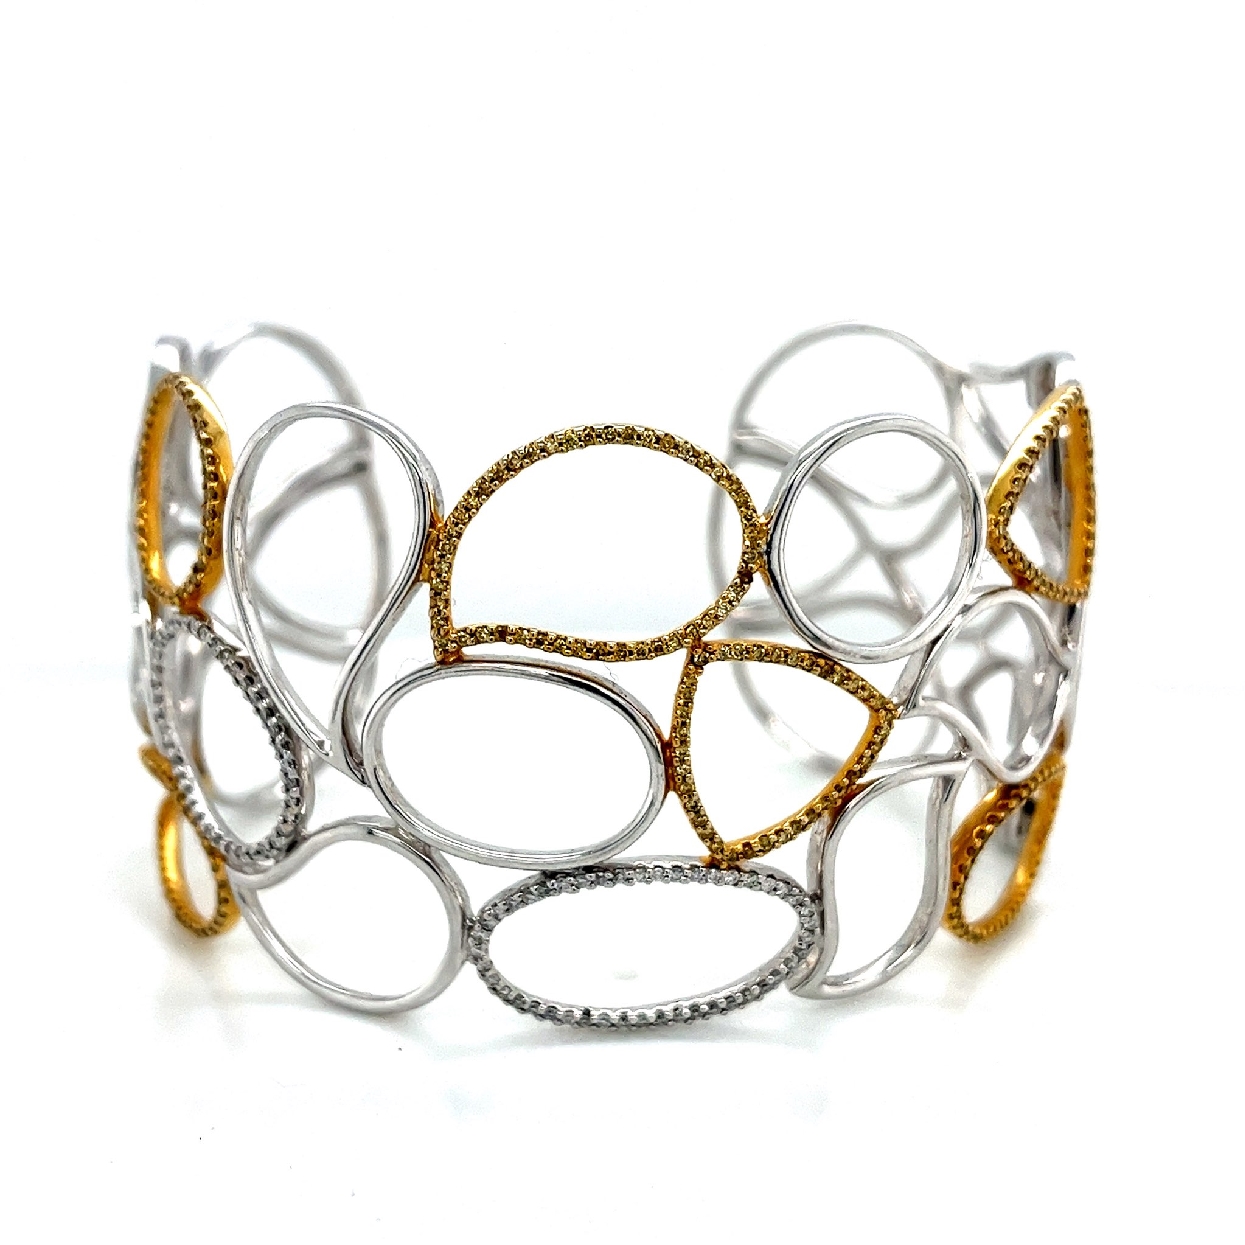 18K White Gold and Yellow Gold Hinged Cuff with White and Yellow Diamonds 

Fits a 7-7.5 Inch Wrist